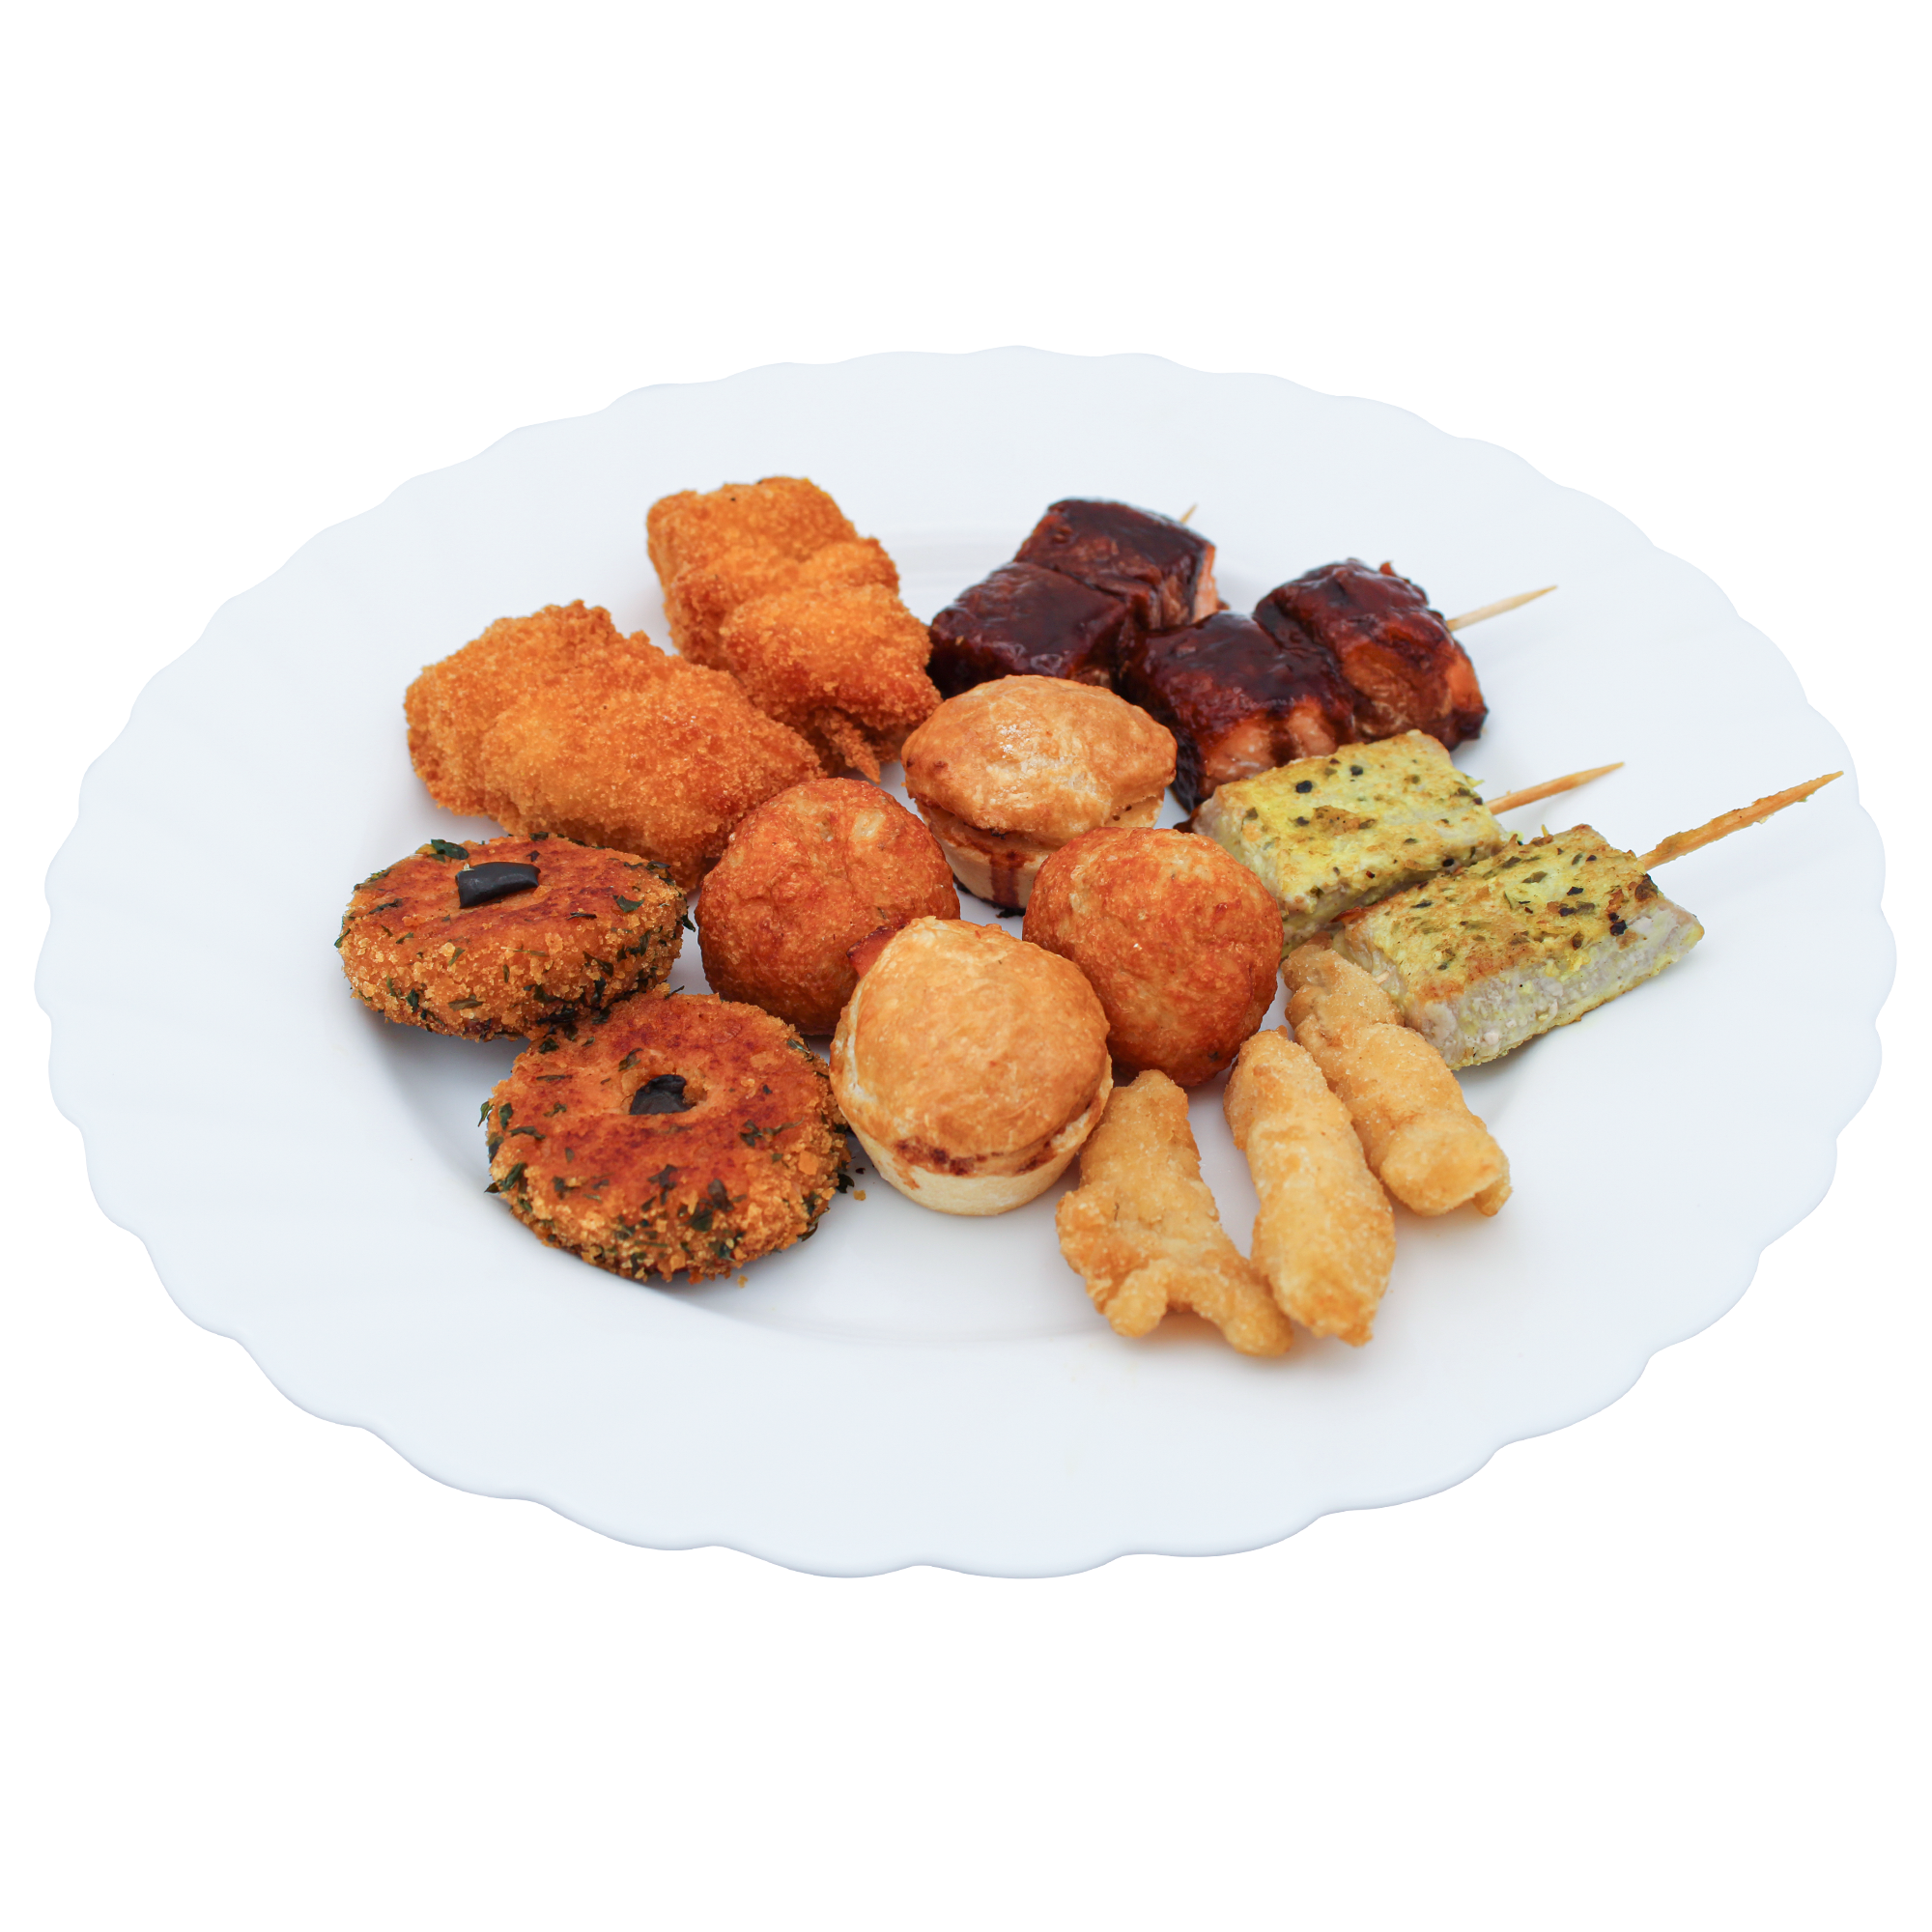 Cold Canapés to include chef's choice of Assorted Fish & Vegetarian options - 8 pcs (China)